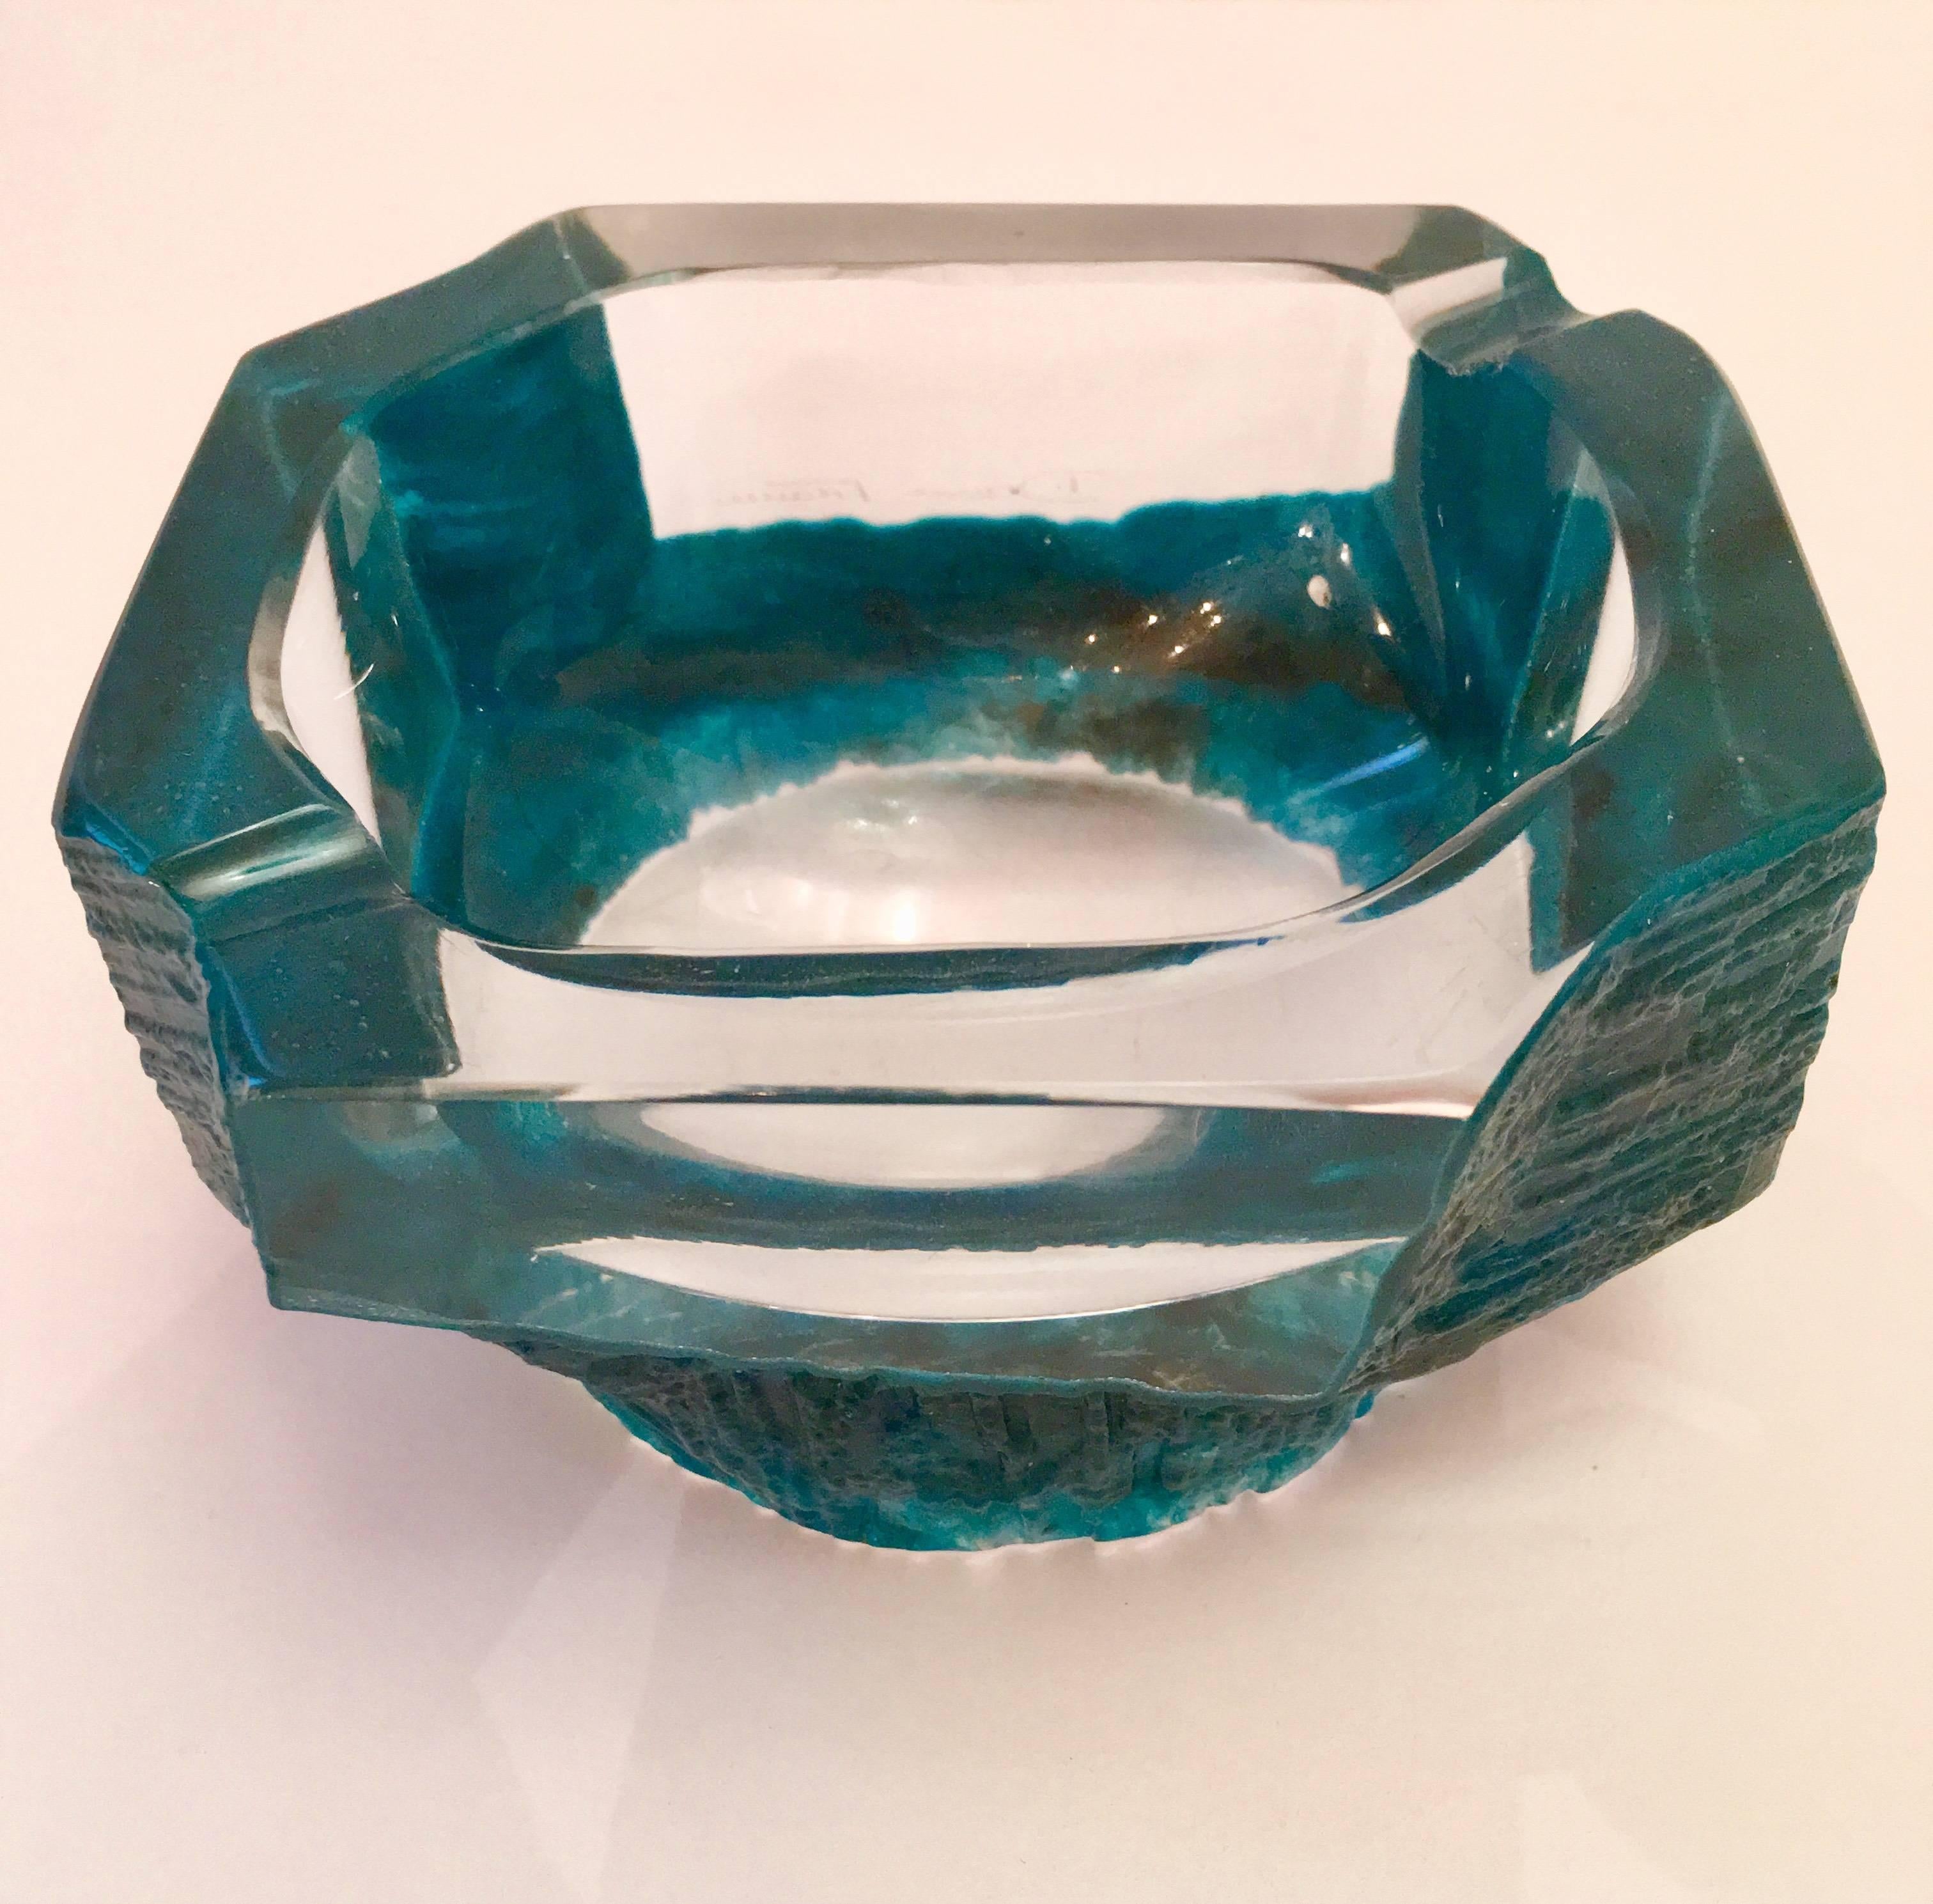 A turquoise and clear solid, heavy crystal bowl designed by the French artist, Cesar Baldaccini. Signed. Could be used for decoration, a candy or trinket dish, or ashtray.